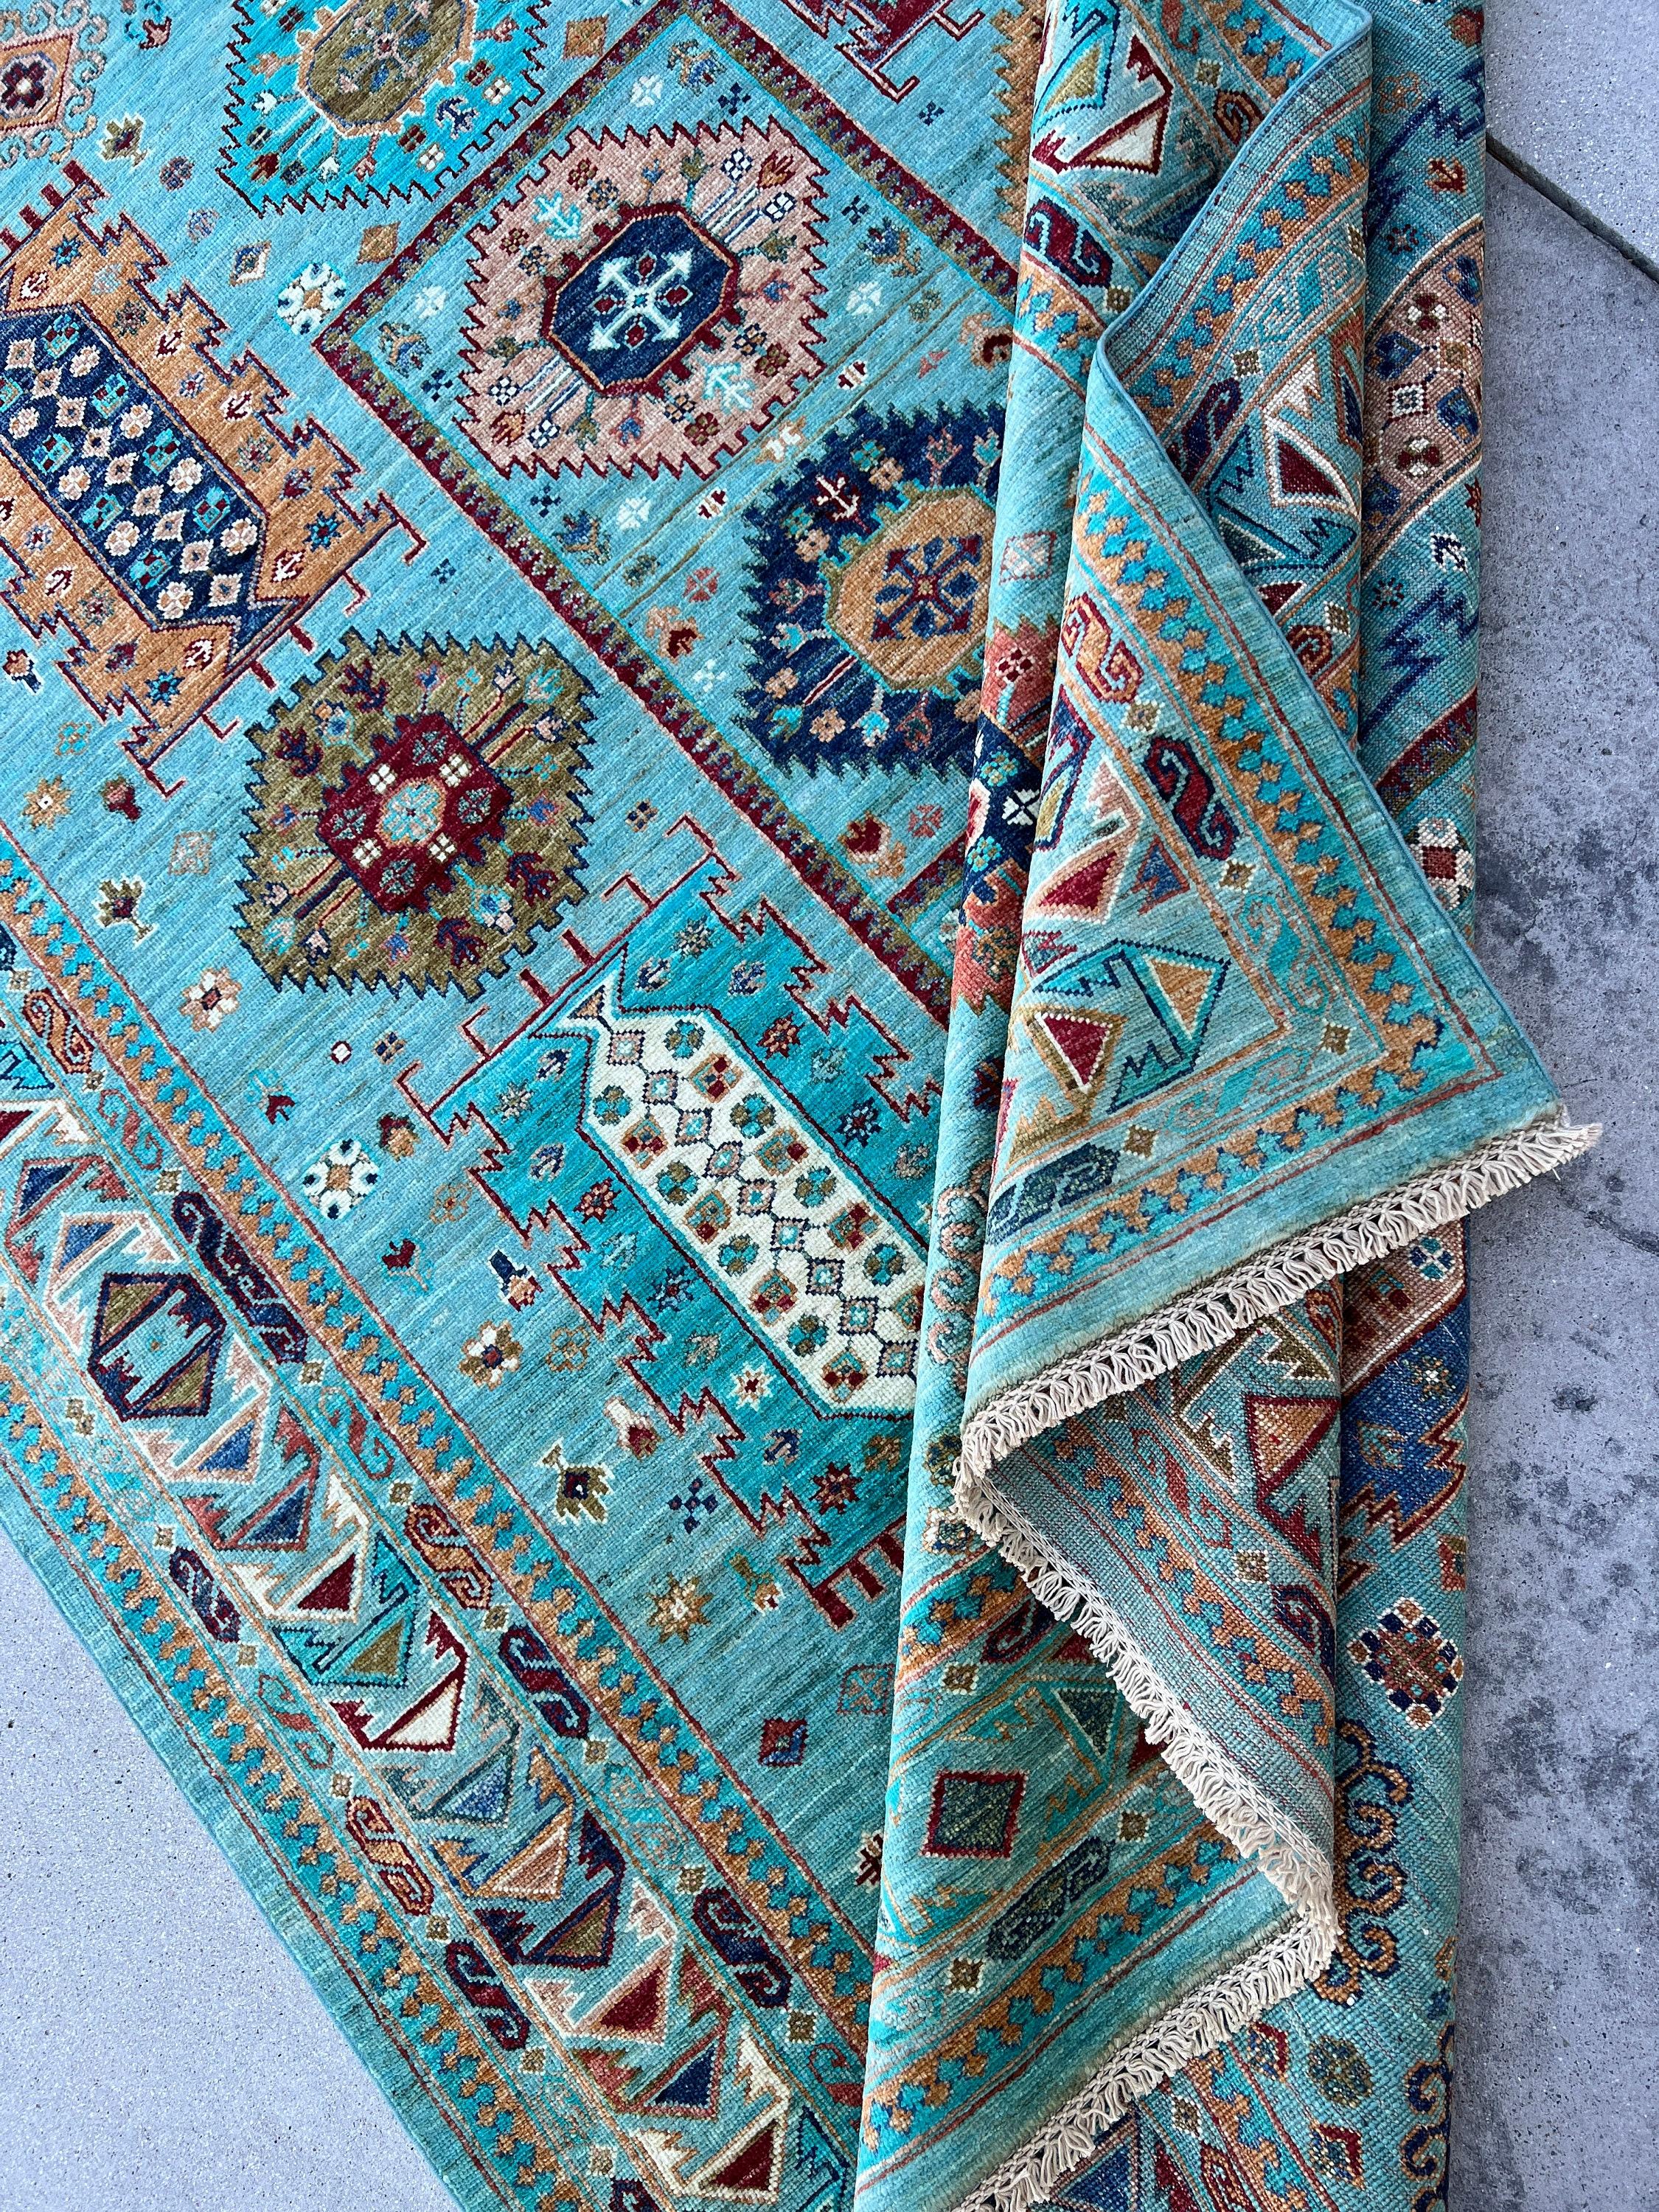 7x8 Hand-Knotted Afghan Rug Premium Hand-Spun Afghan Wool Fair Trade Turquoise  For Sale 2